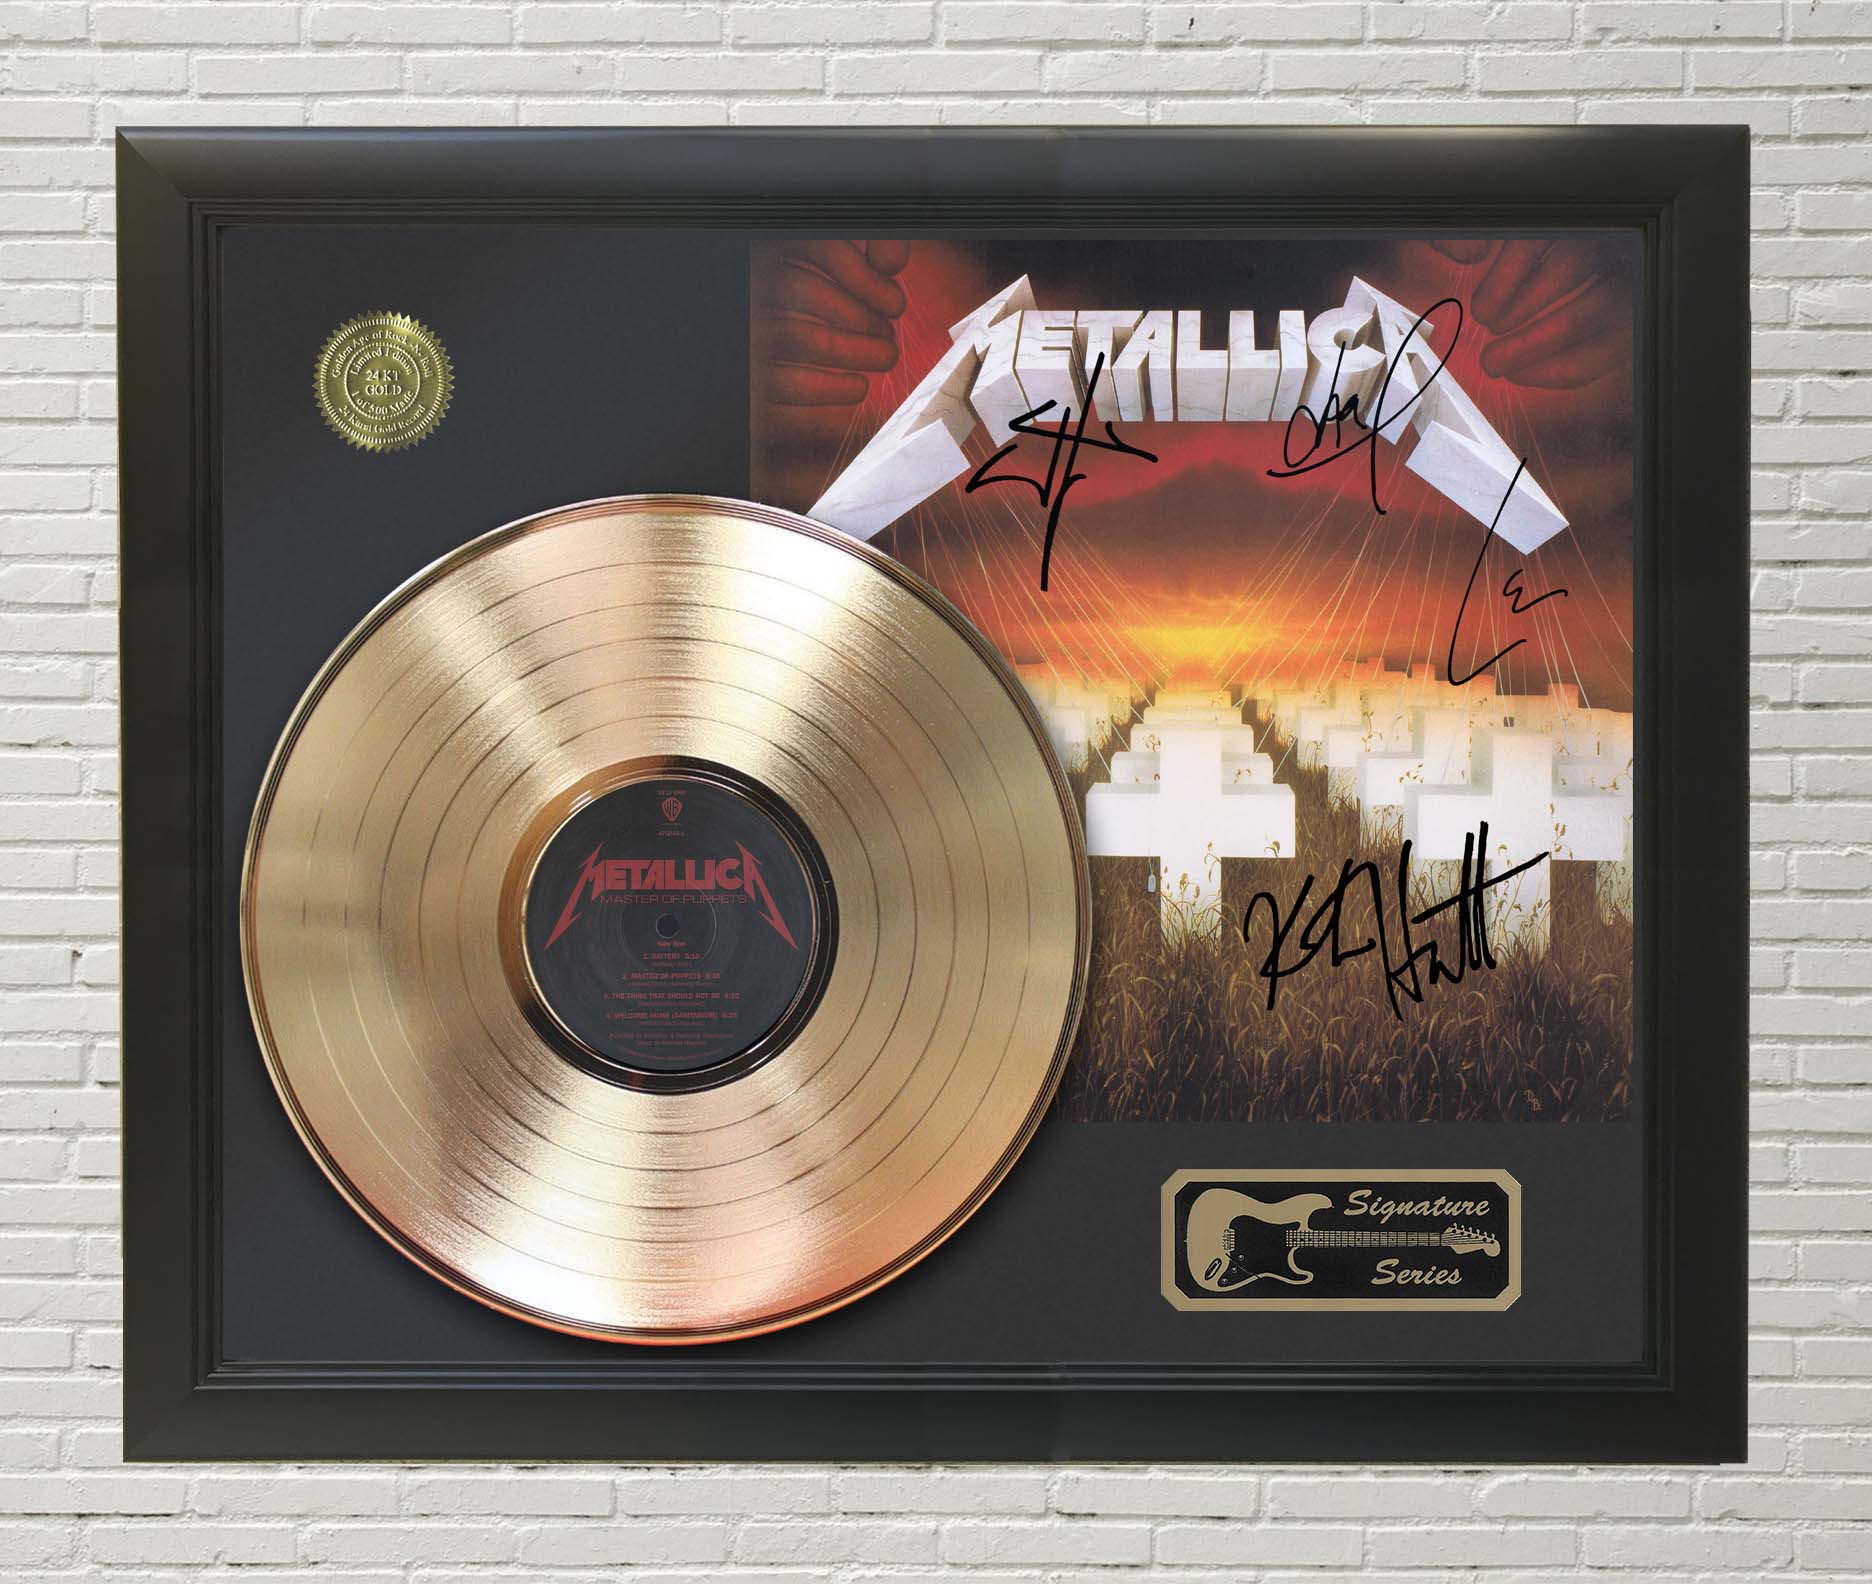 Metallica - Master of Puppets Framed Signature Gold LP Record Display M4 -  Gold Record Outlet Album and Disc Collectible Memorabilia